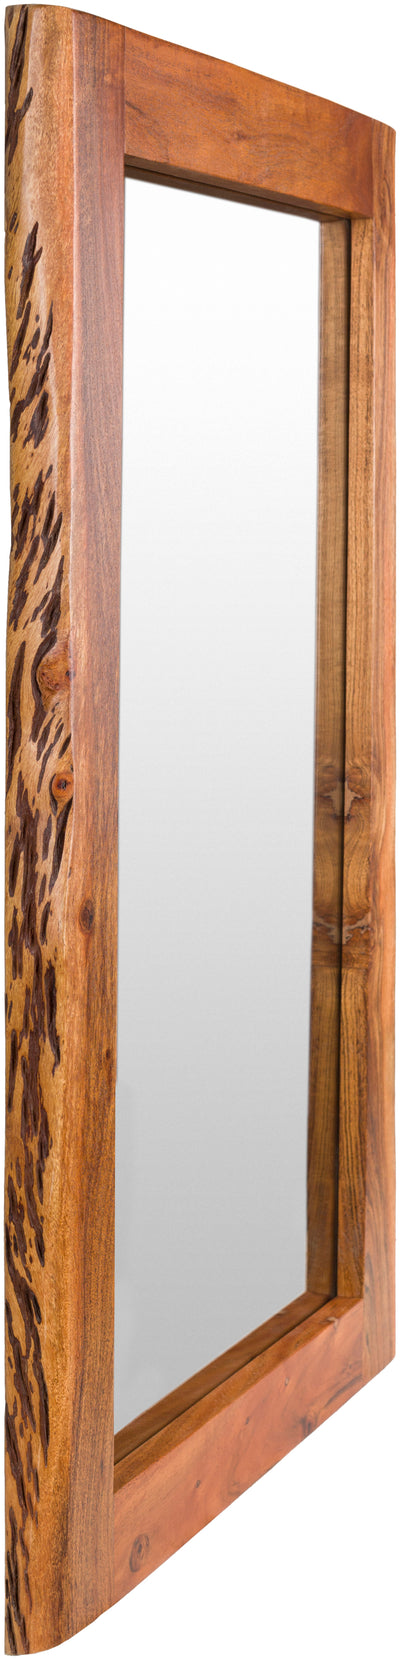 product image for Edge DGE-100 Rectangular Mirror by Surya 2